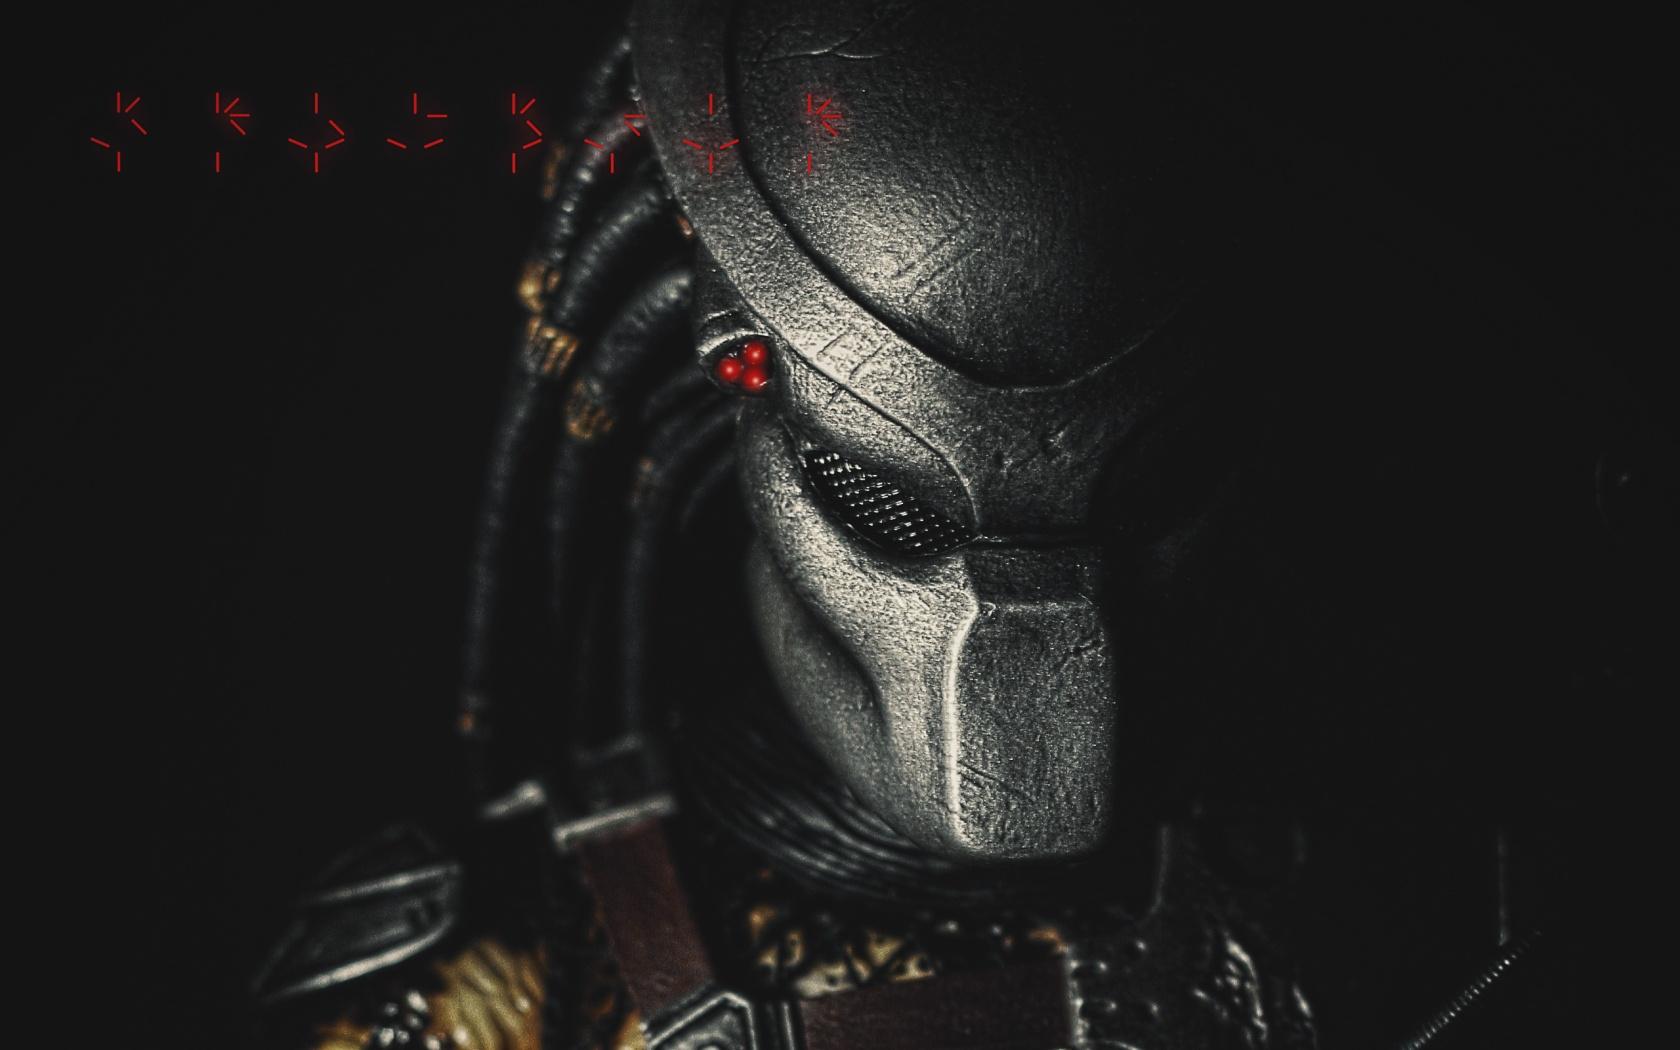 Call of Duty: Ghost New 'Devastation' Update Featuring 'The Predator'